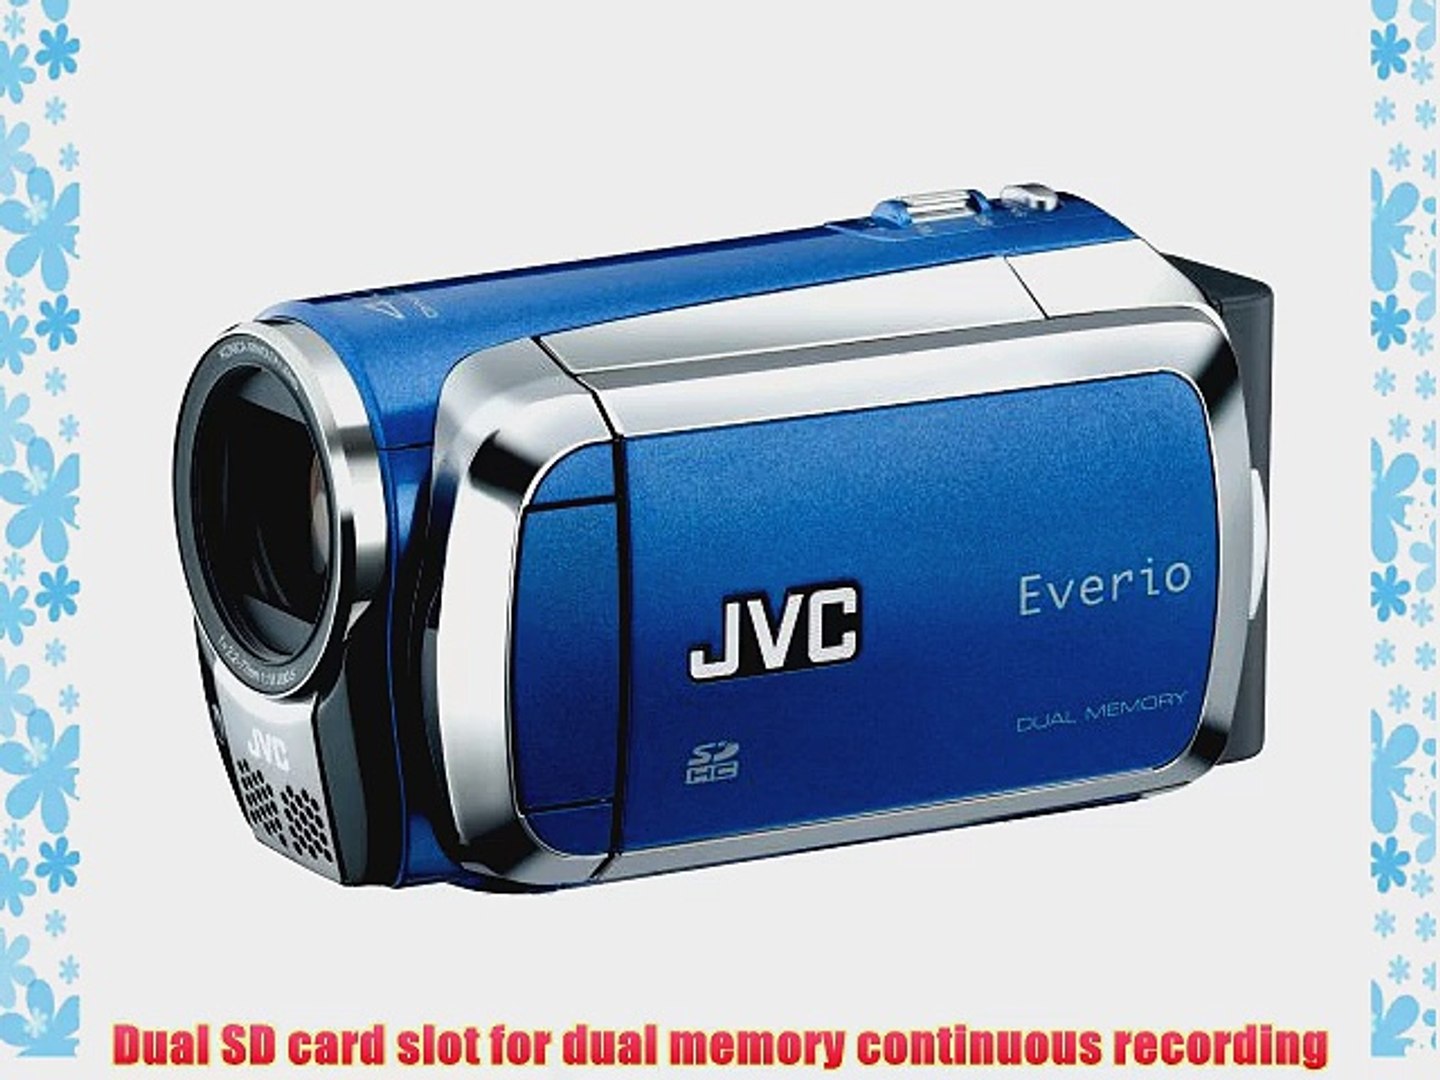 8GB Class 10 SDHC High Speed Memory Card For JVC EVERIO CAMCORDER MS230 Perfect for high-speed continuous shooting and filming in HD Comes with Hot Deals 4 Less All In One Swivel USB card reader and.